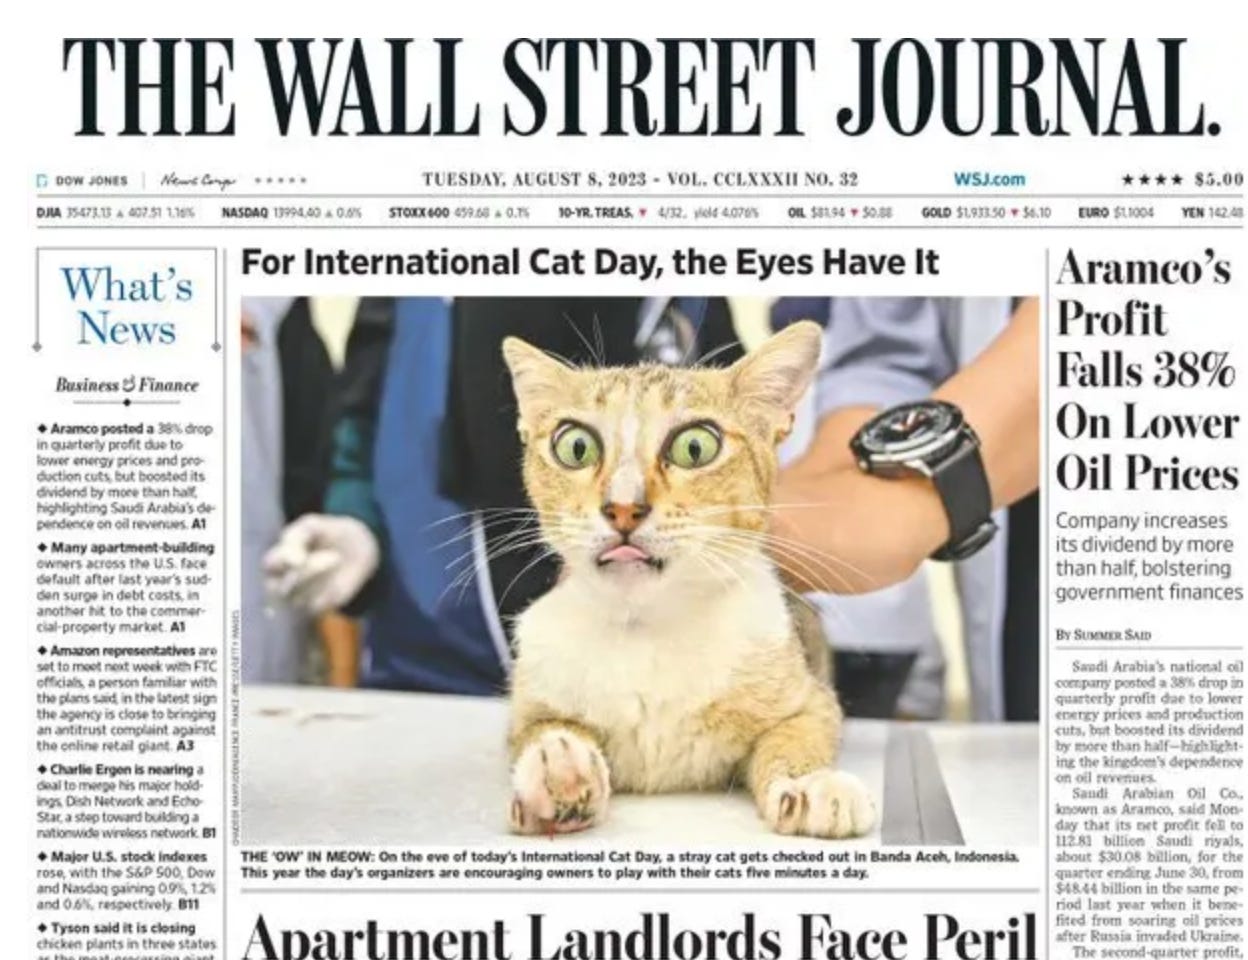 Front page of Wall Street Journal with a large photo of a cute cat